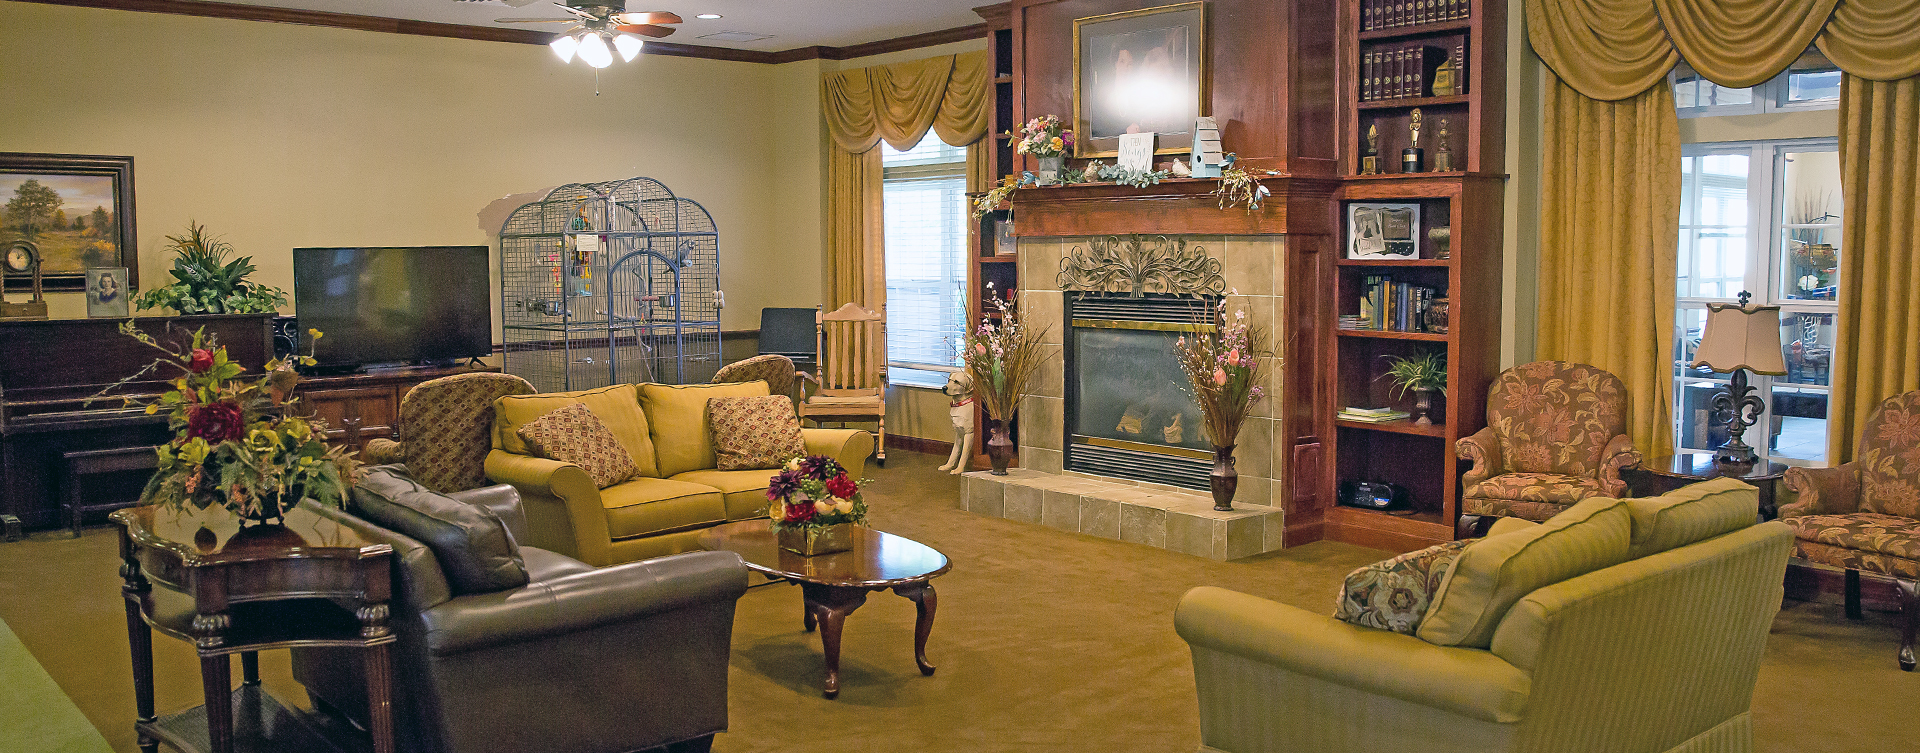 Socialize with friends in the living room at Bickford of Battle Creek